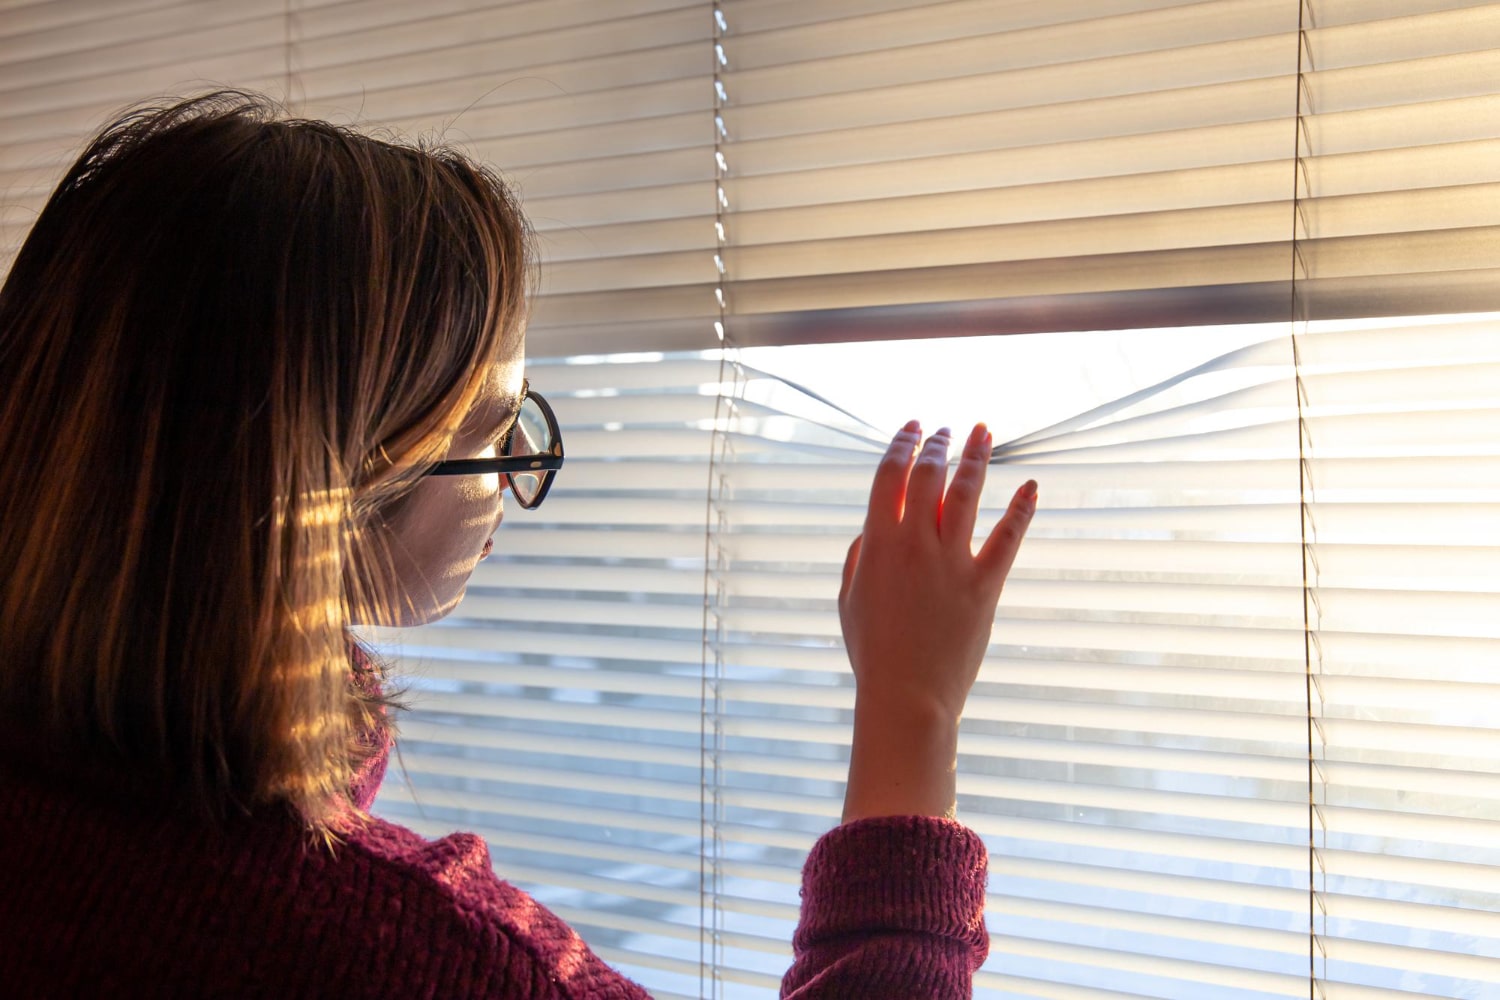 Find The Perfect Window Covering With Just Blinds’s Custom Blinds And Shades